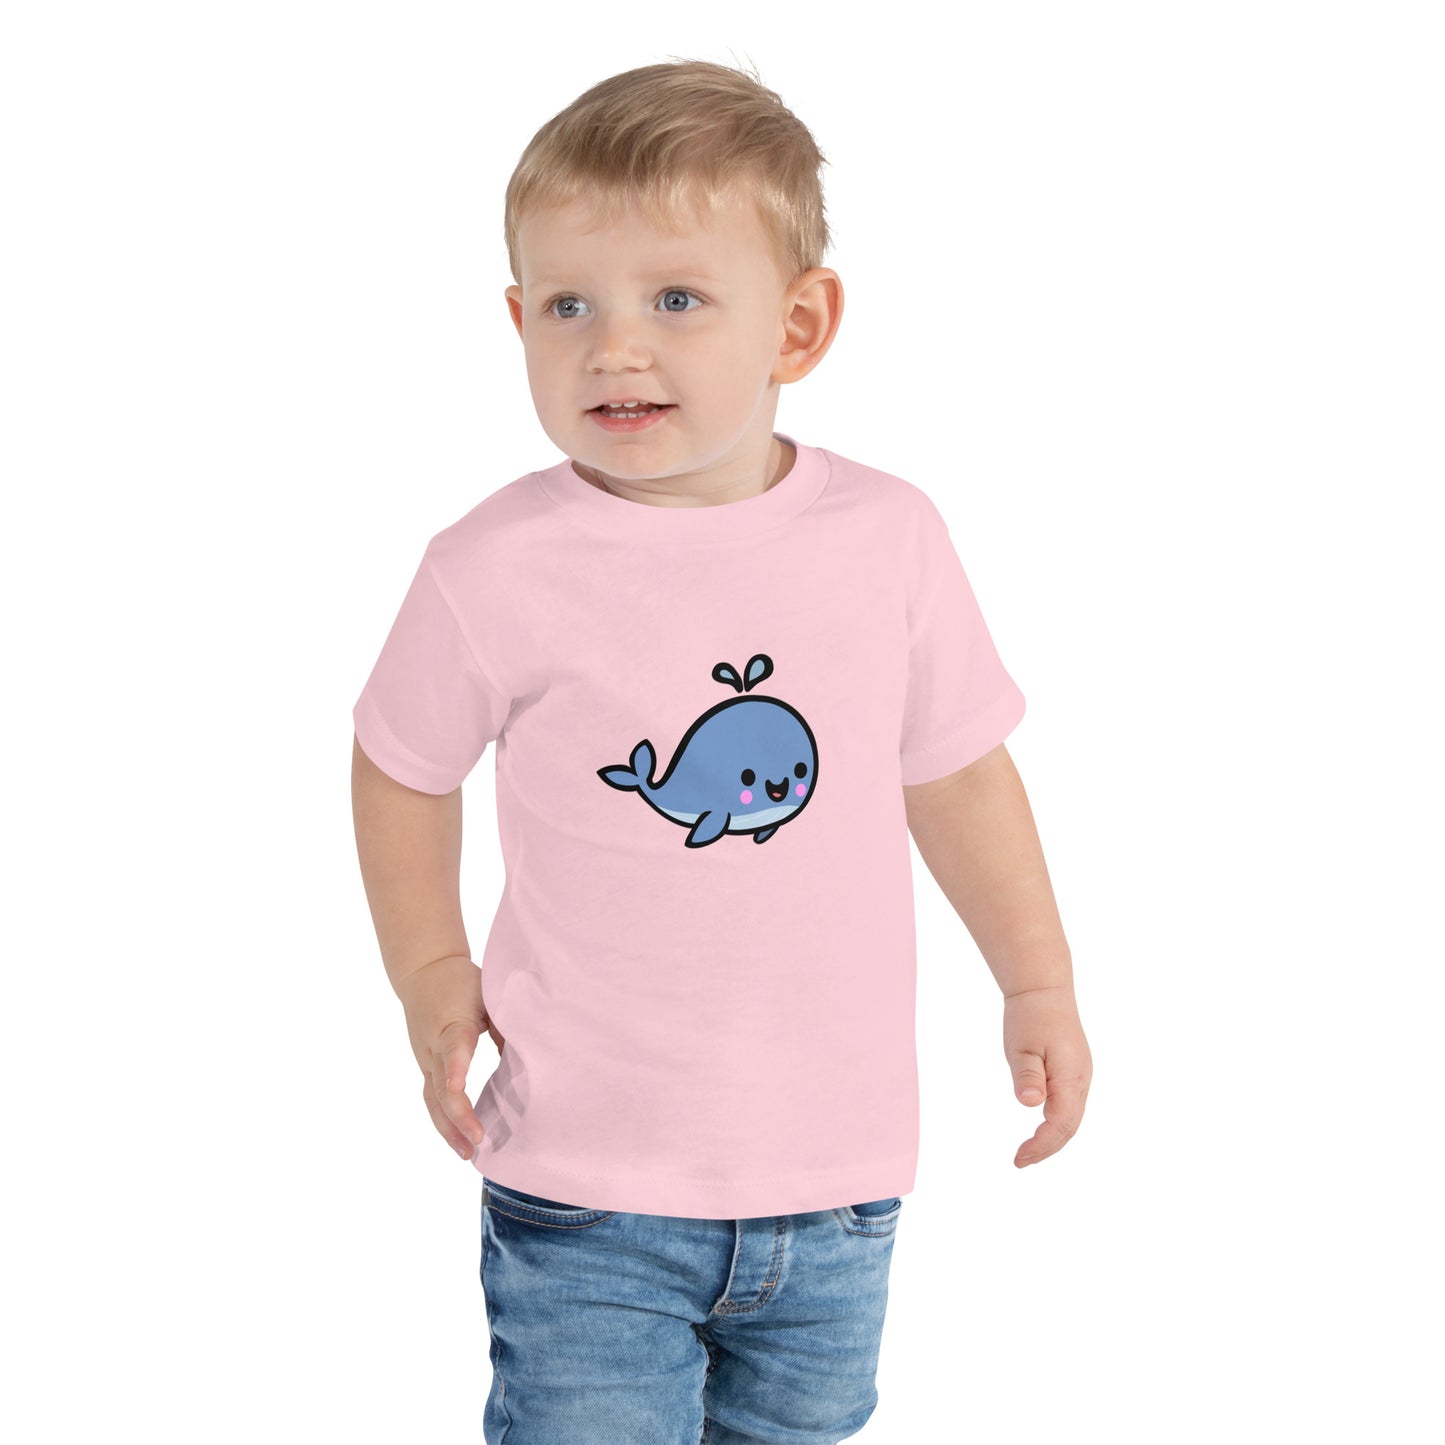 Baby Whale - Toddler Short Sleeve Tee